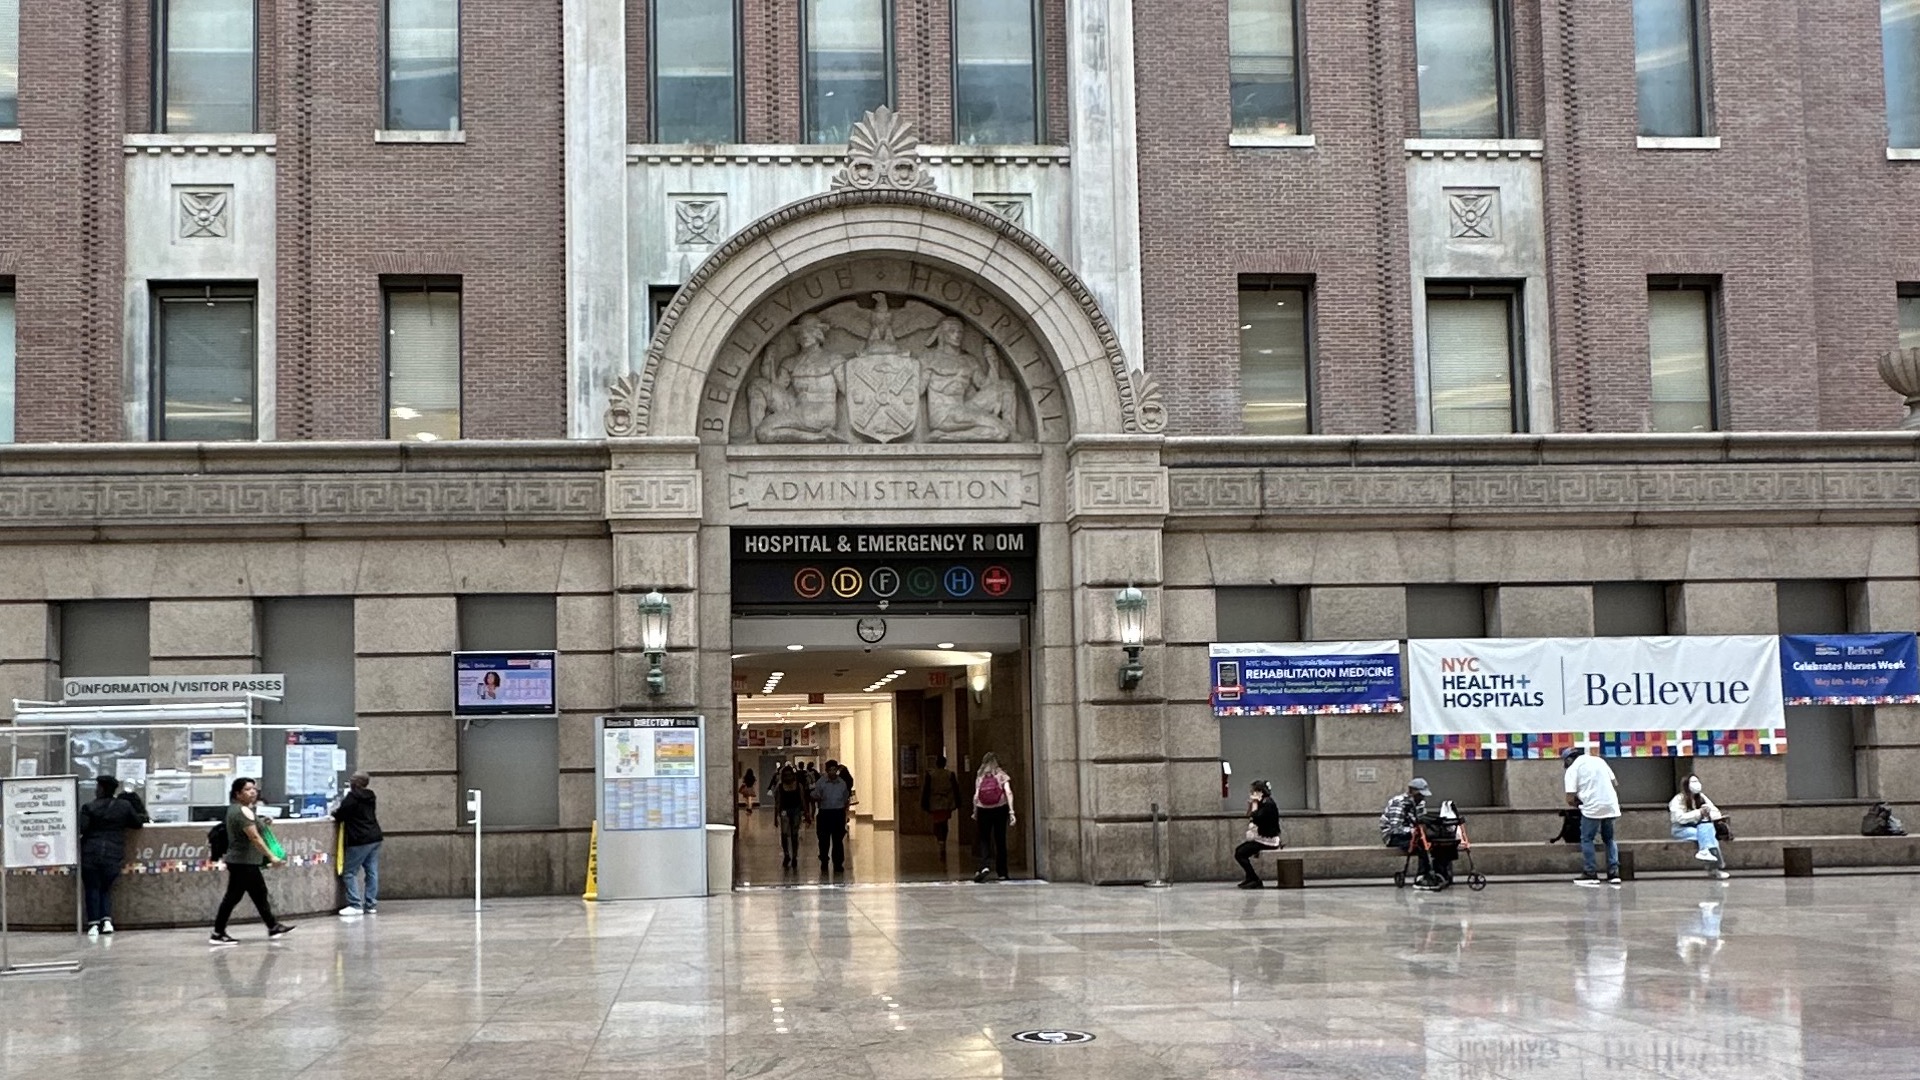 Exterior of Bellevue Hospital, where Emiliano Lara interned over the summer as a Tarbutton Leadership Fellow.